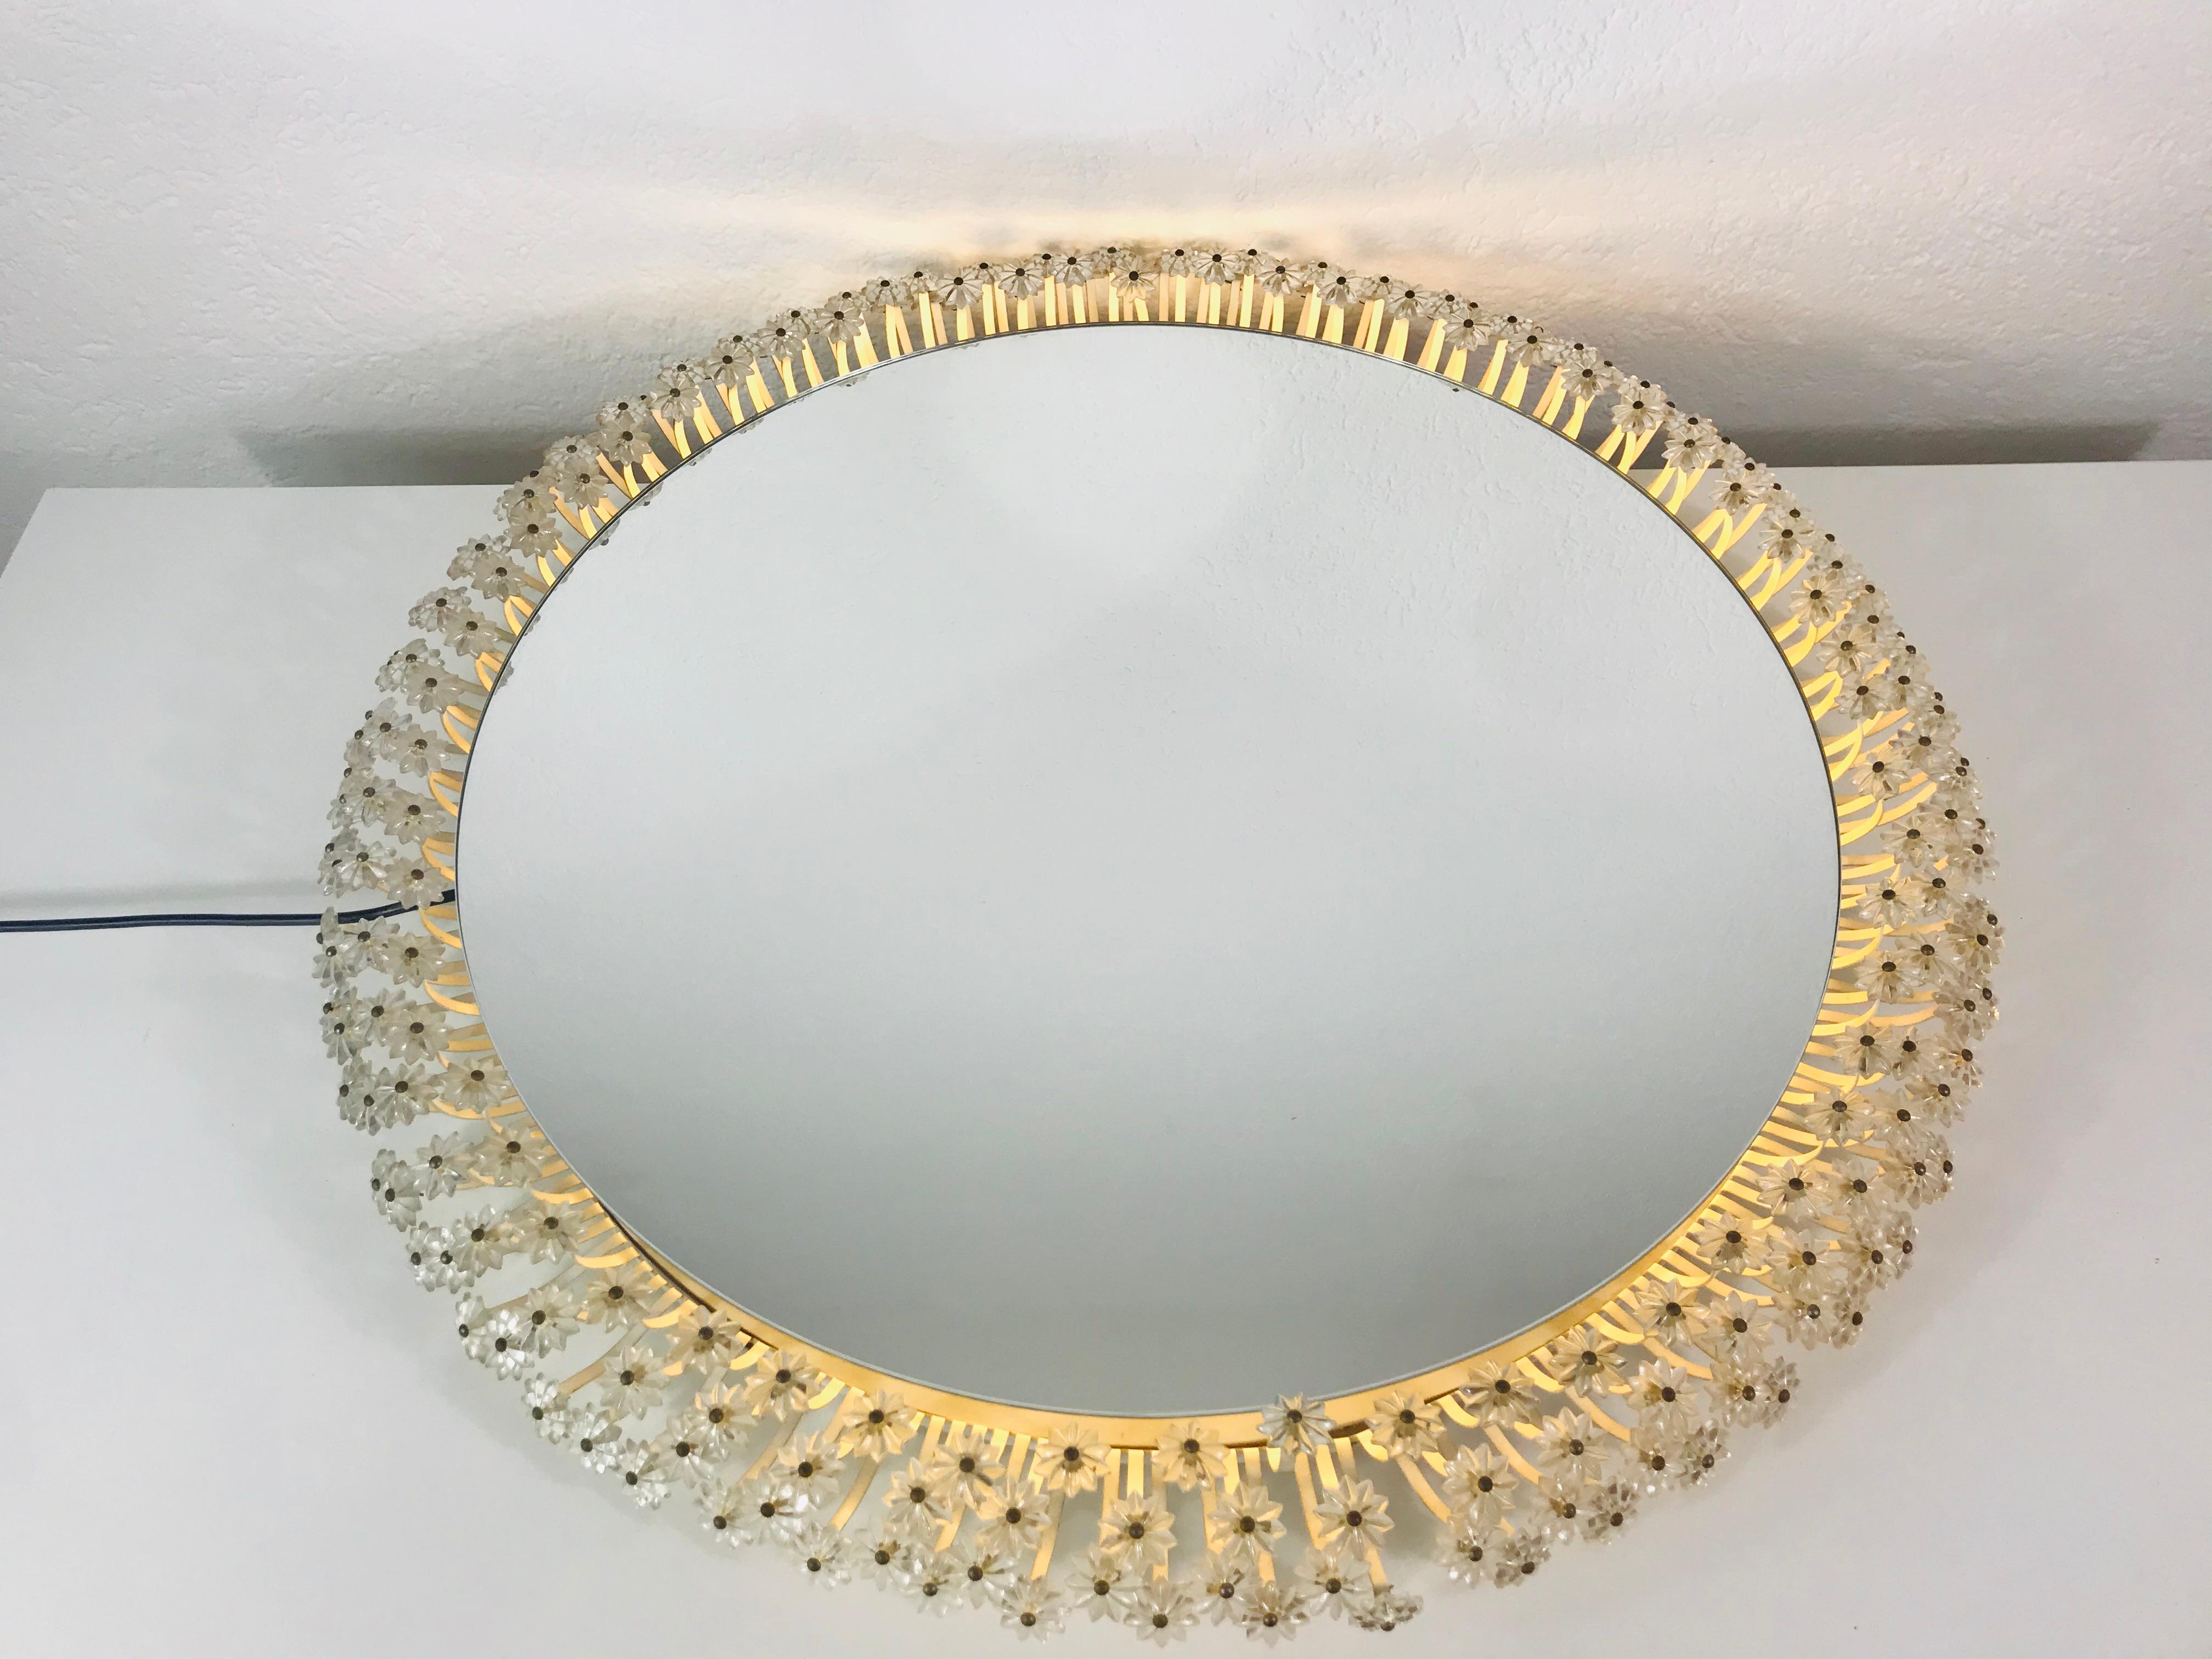 An illuminated wall mirror from the 1960s made in Austria. It was designed by Emil Stejnar for Rupert Nikoll. The mirror has a round design with beautiful acrylic flowers. There are E14 light bulbs inside the frame. The mirror is in a good vintage